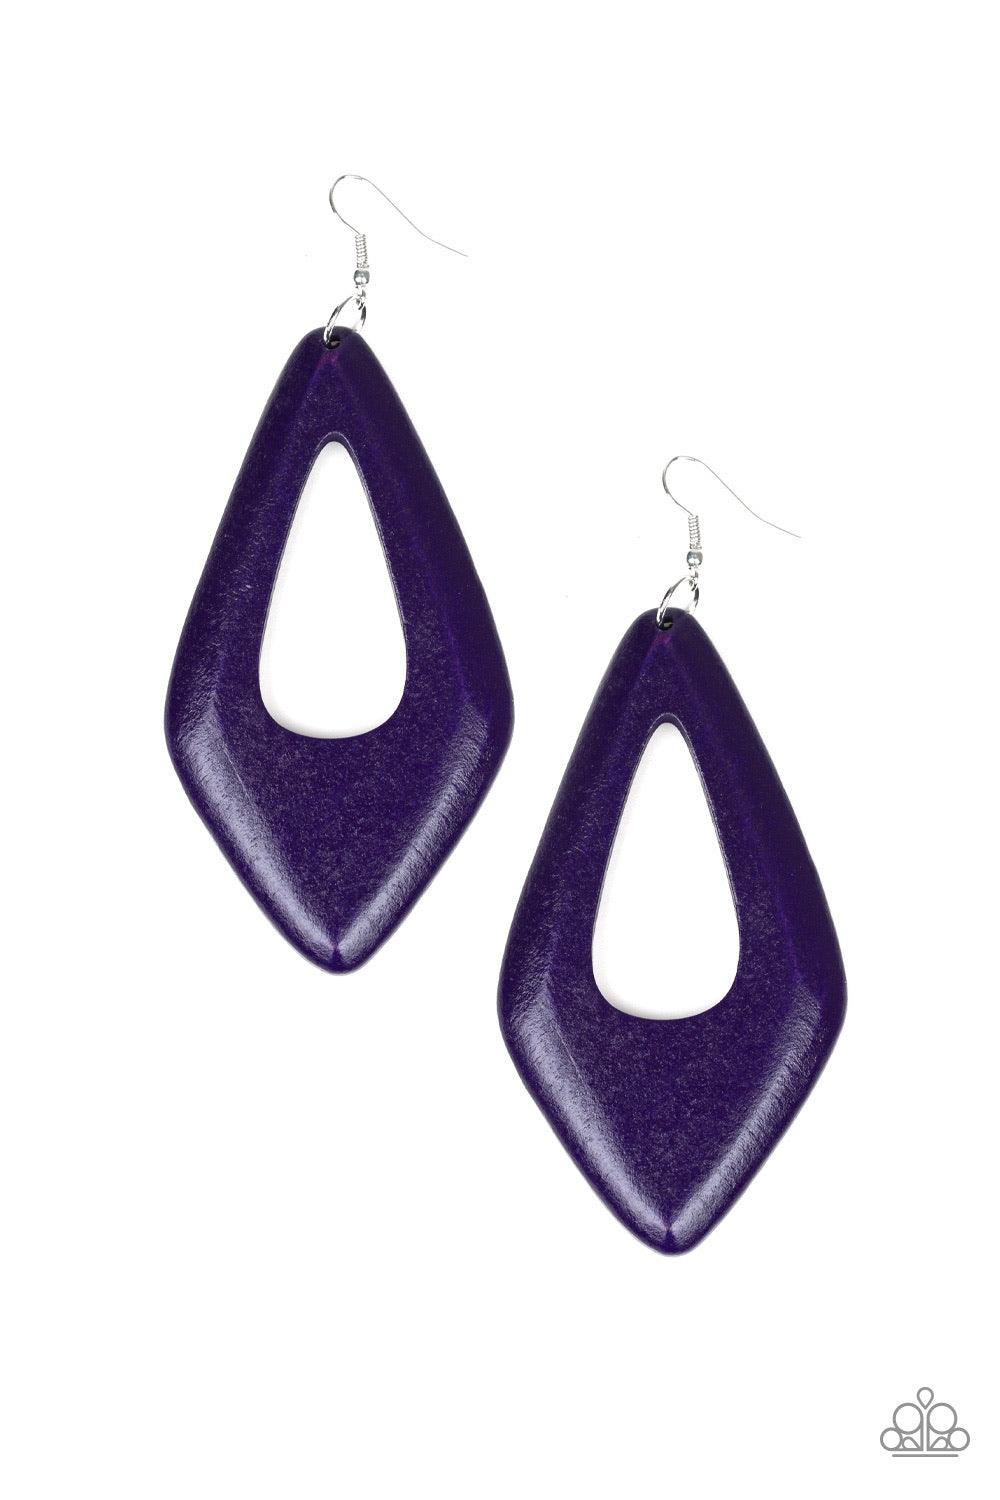 Paparazzi Accessories A Shore Bet - Purple Brushed in a shiny purple finish, a bold wooden frame swings from the ear for a seasonal look. Earring attaches to a standard fishhook fitting. Jewelry